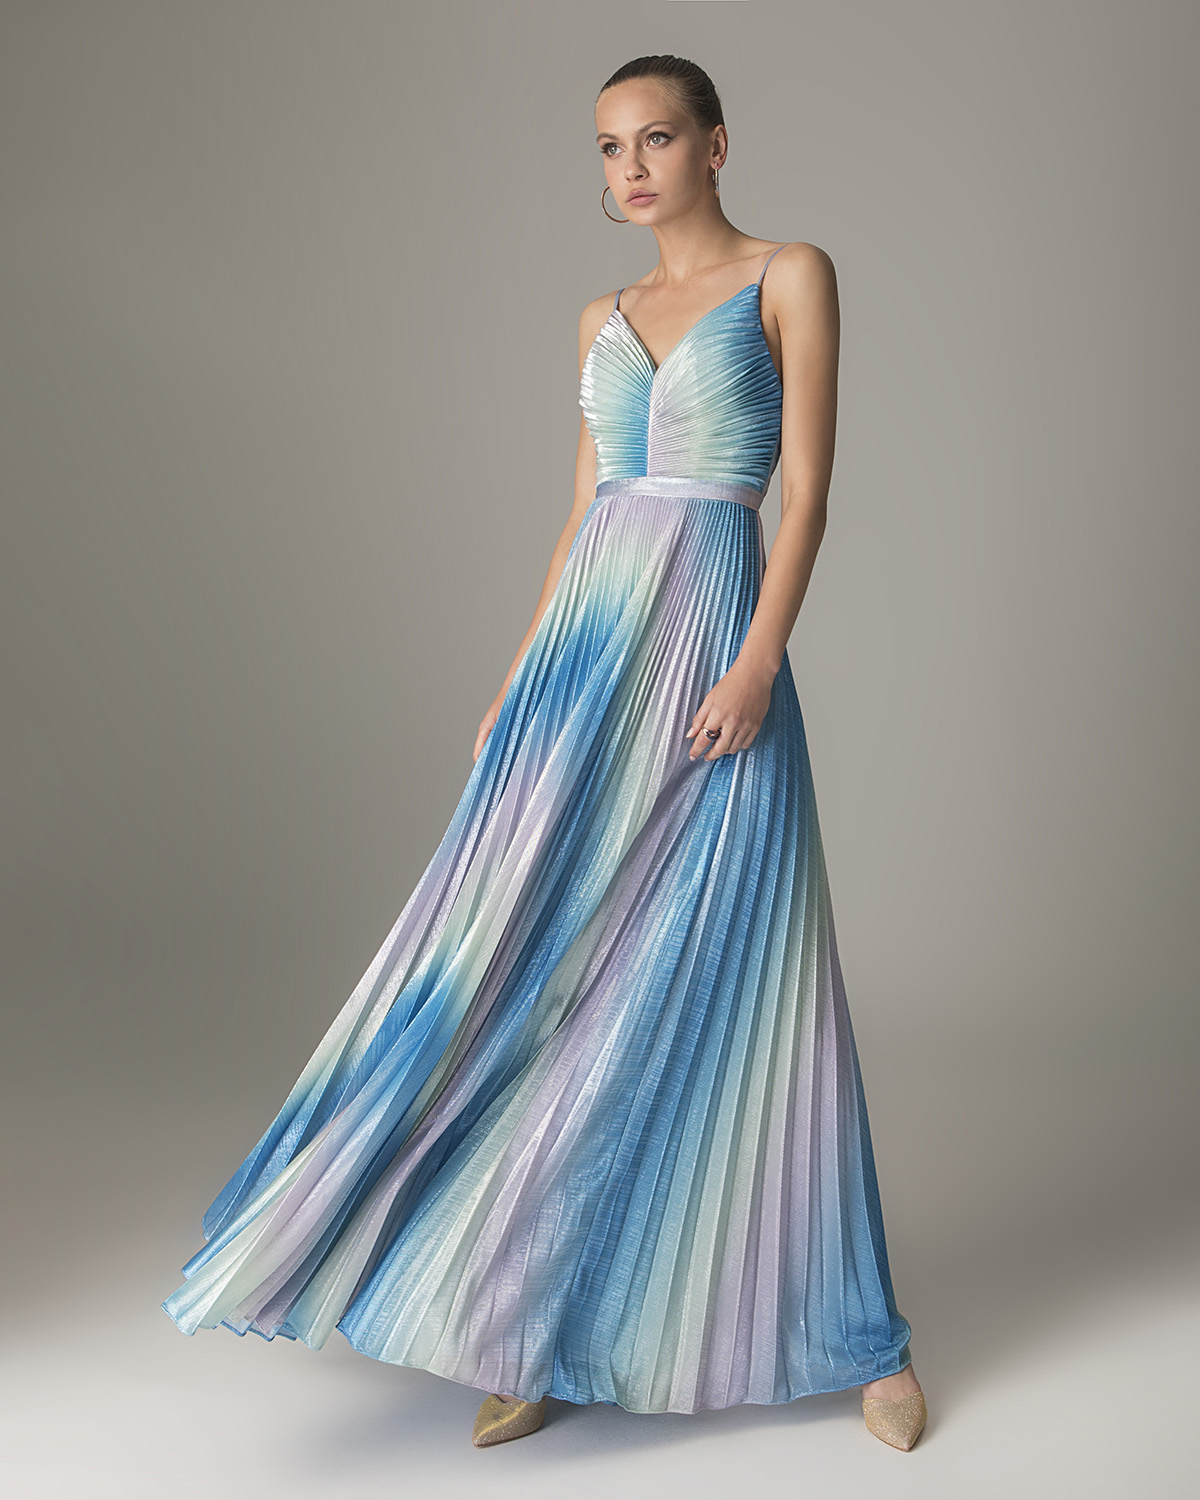 Cocktail Dresses / Long pleated cocktail dress with shining fabric